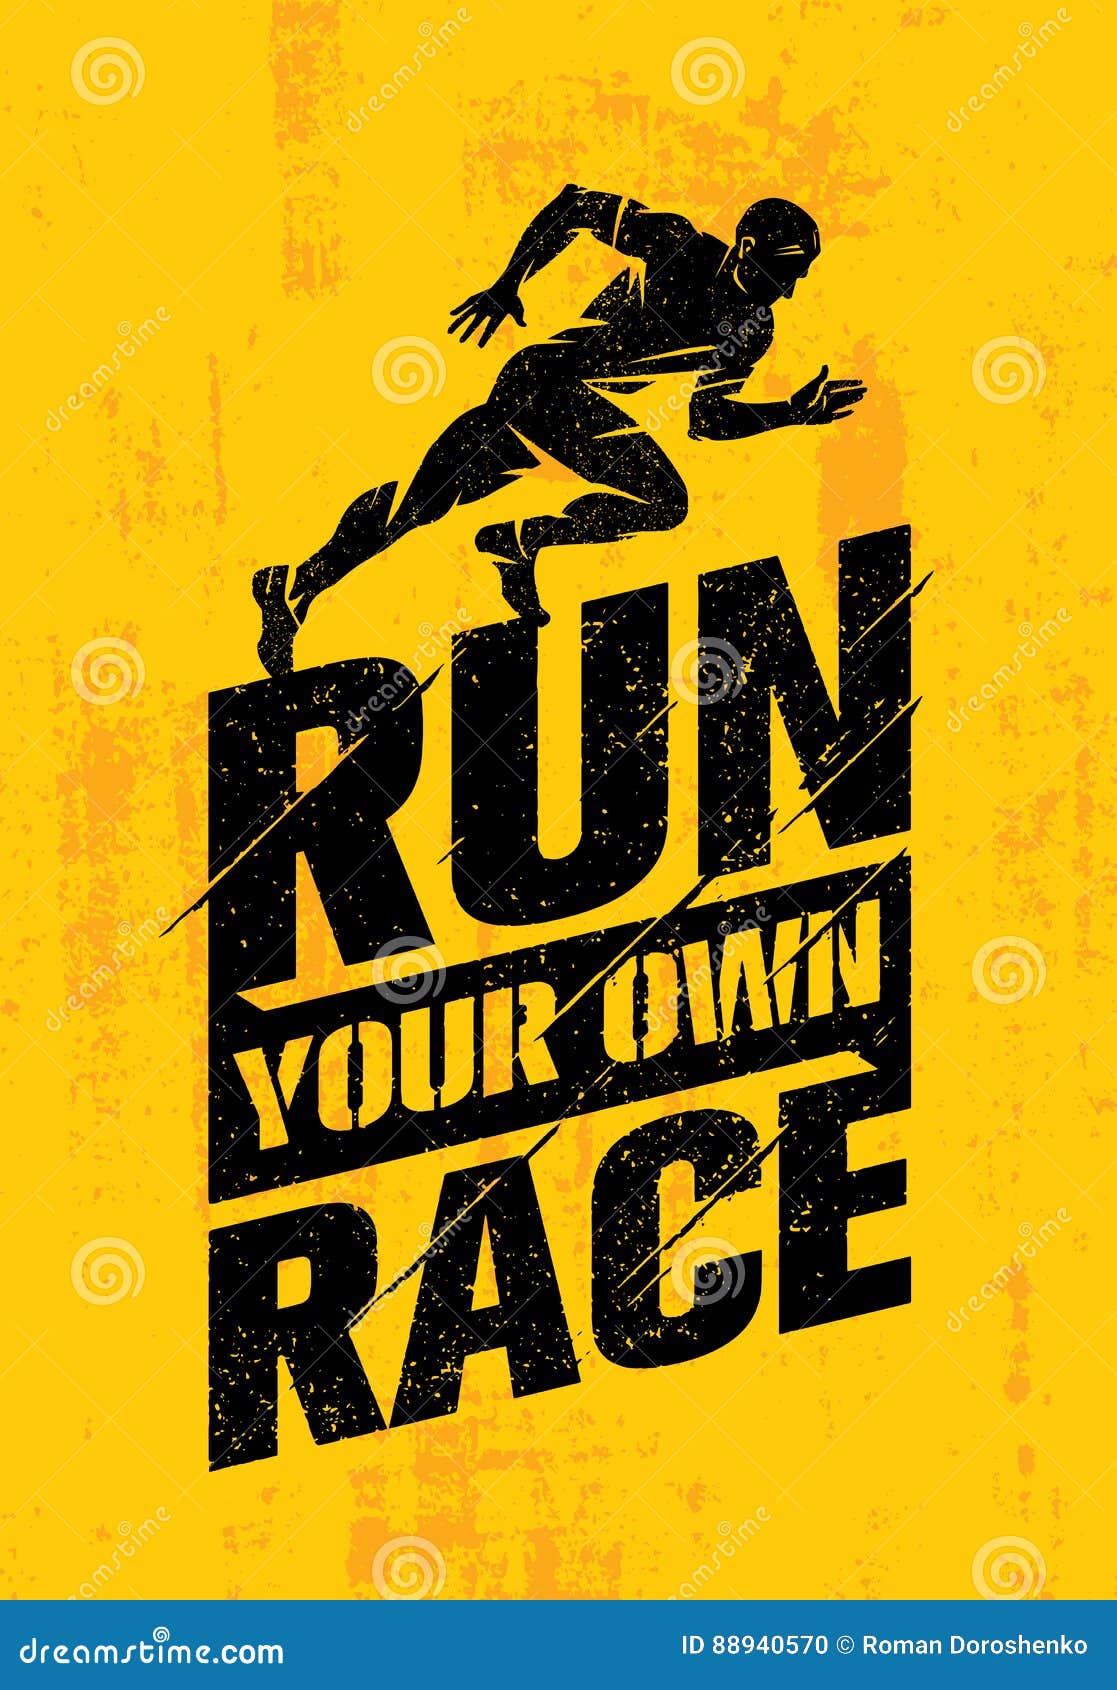 Run Your Own Race Inspiring Active Sport Creative Motivation Quote